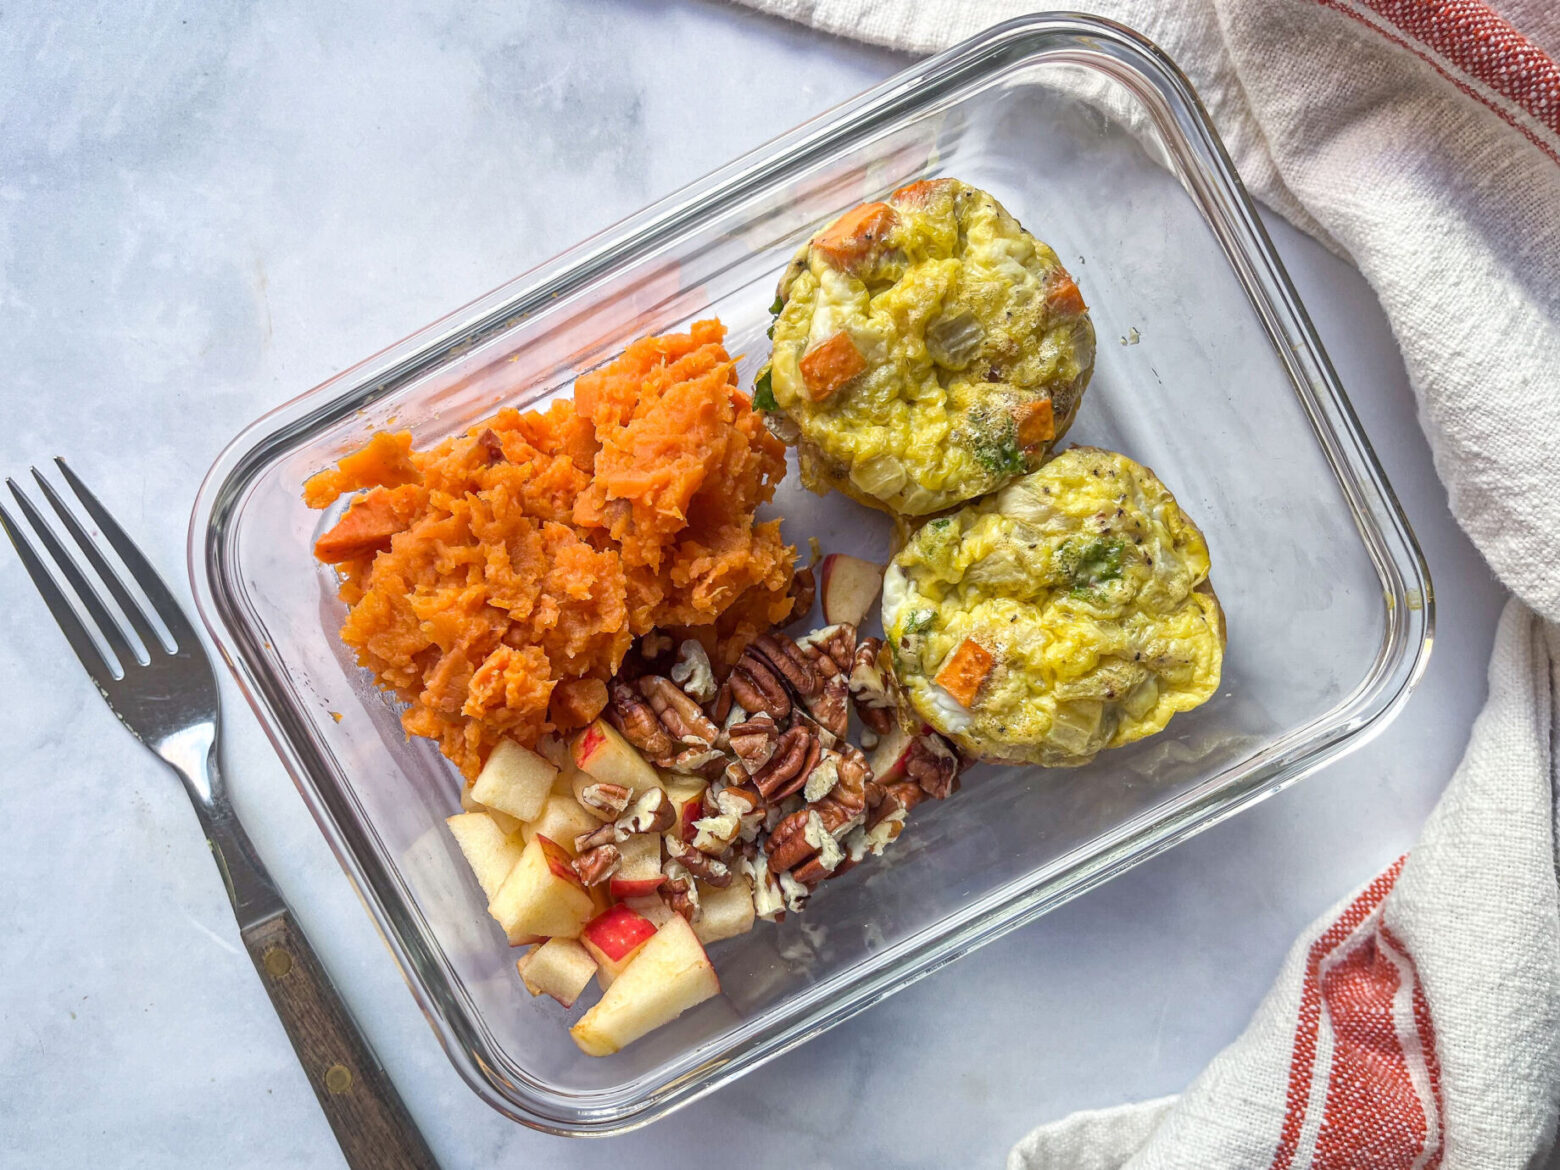 Quick and Easy Breakfast Meal Prep Ideas - The Paleo Diet®